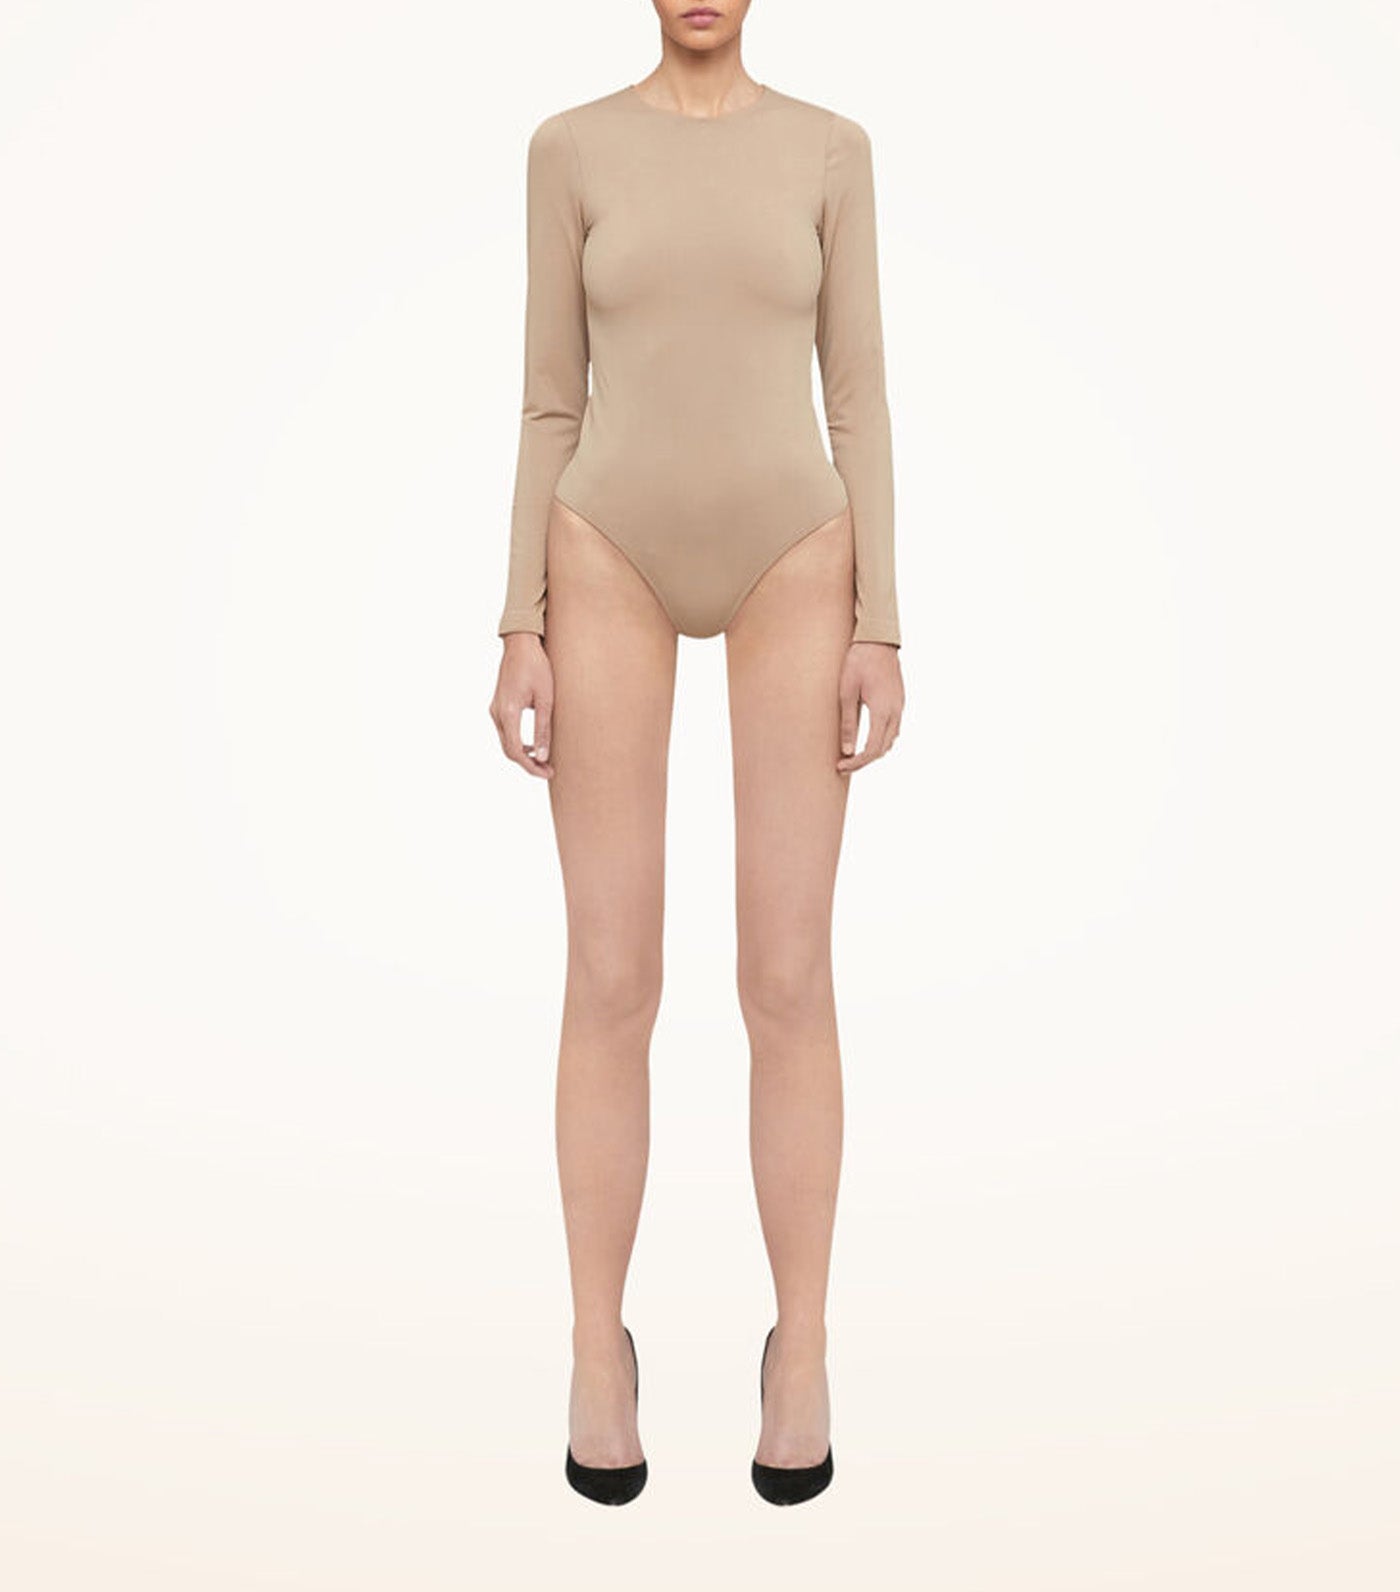 Shaping string bodysuit by Wolford